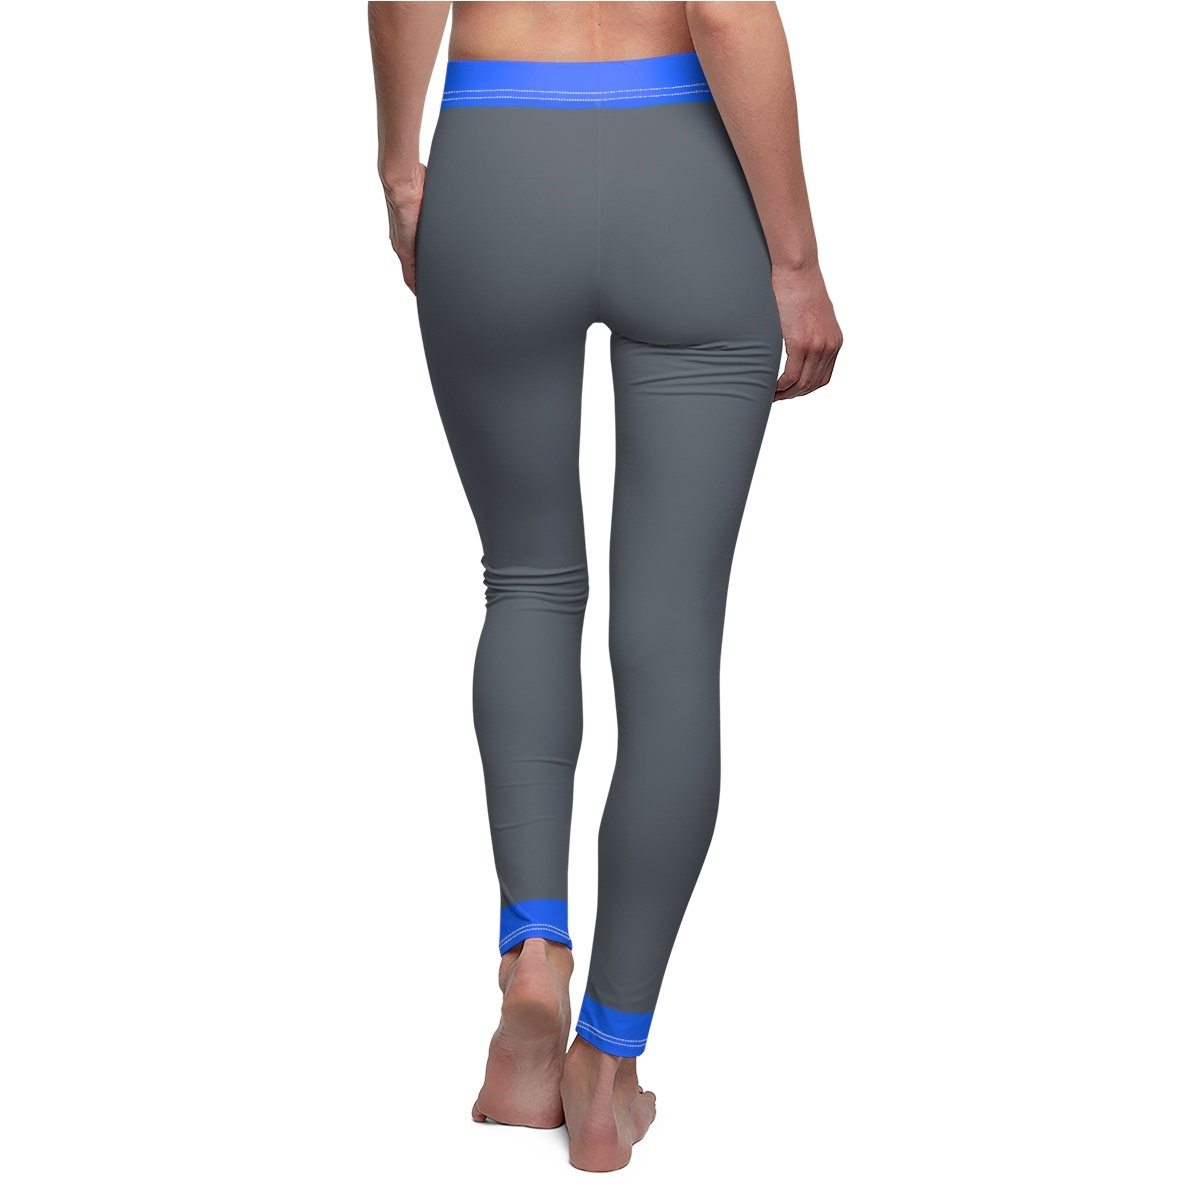 Honeycomb - V.3 - Extreme Sportswear Cut & Sew Leggings Template-Photoshop Template - Photo Solutions